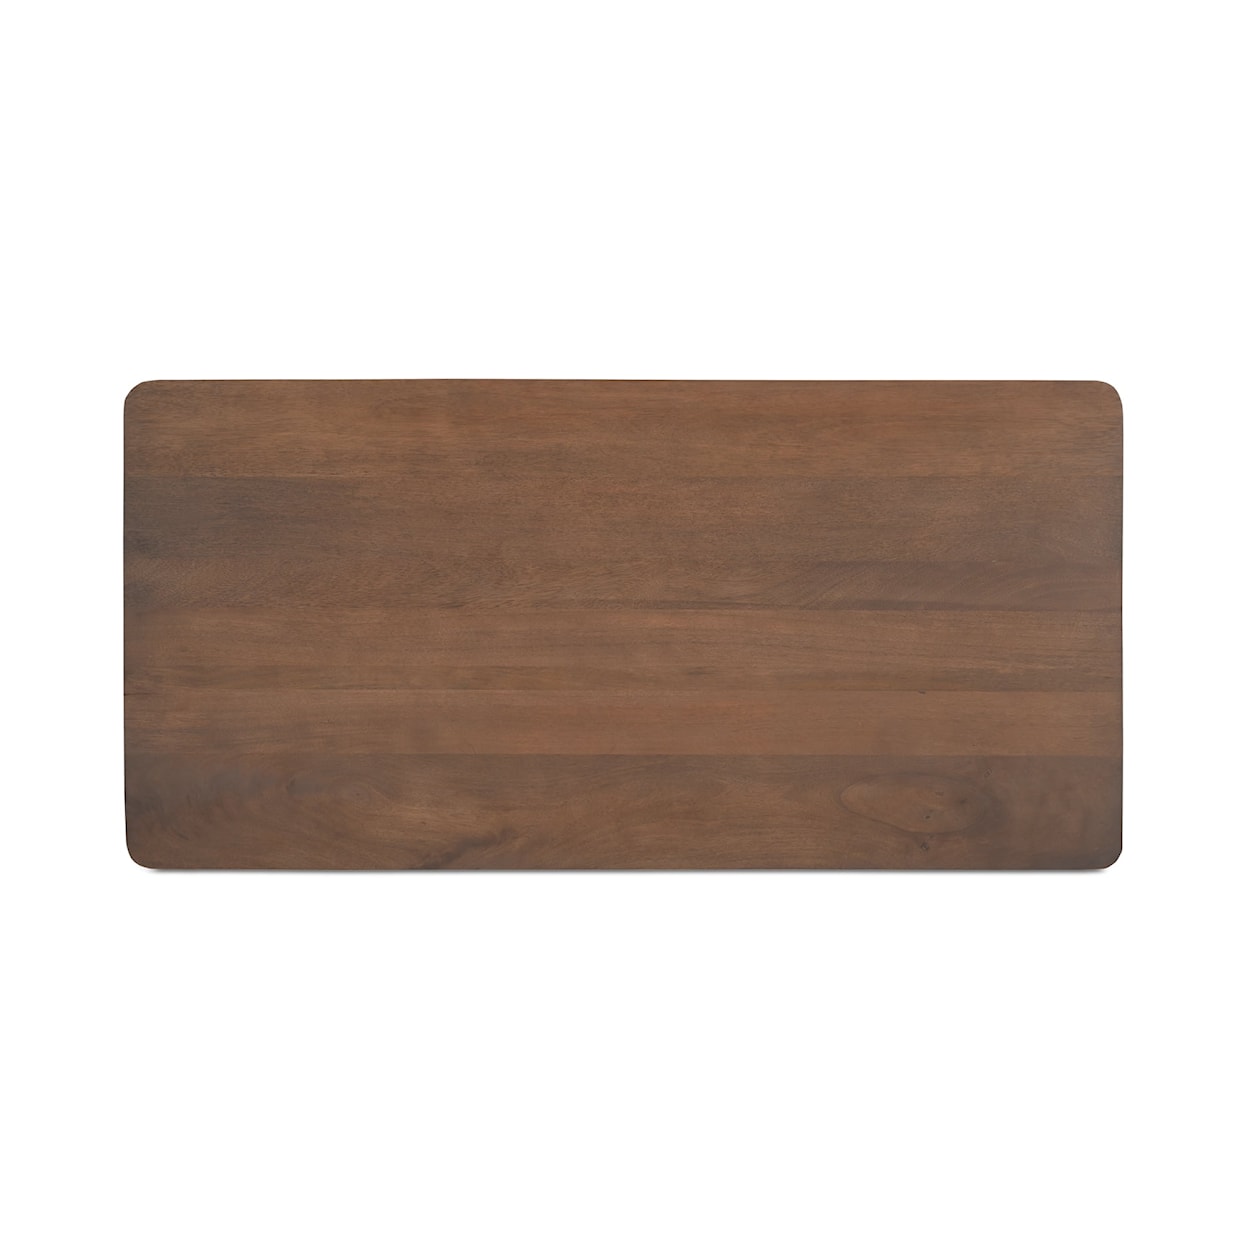 Moe's Home Collection Wiley Coffee Table